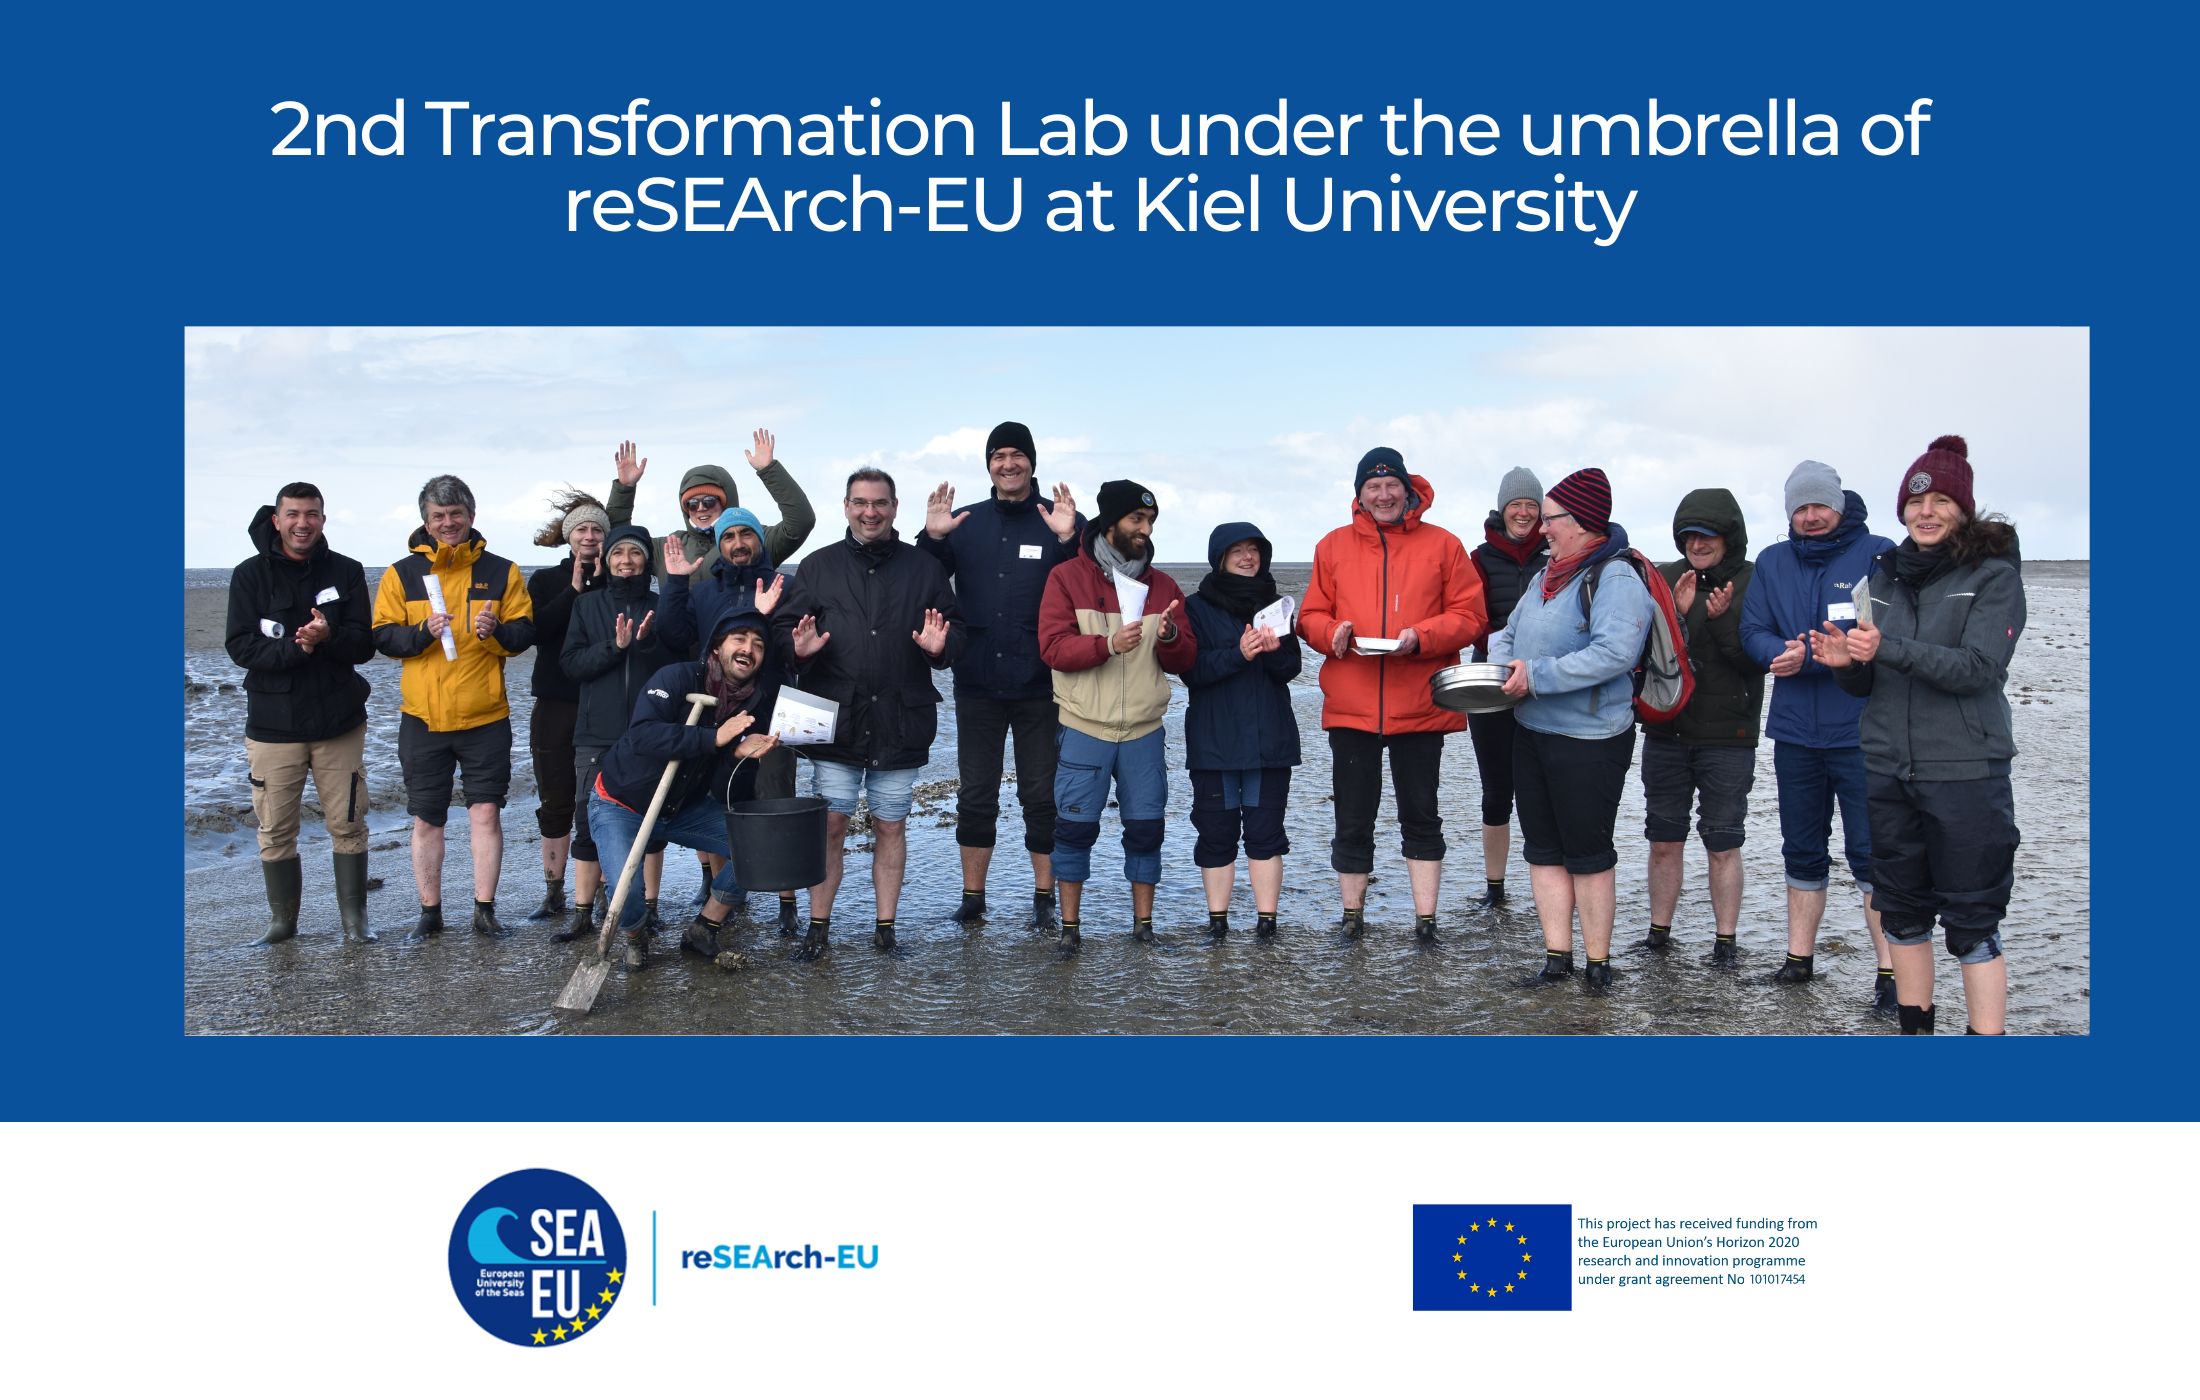 2nd Transformation Lab under the umbrella of reSEArch-EU 25th to 27th April at Kiel University, Germany